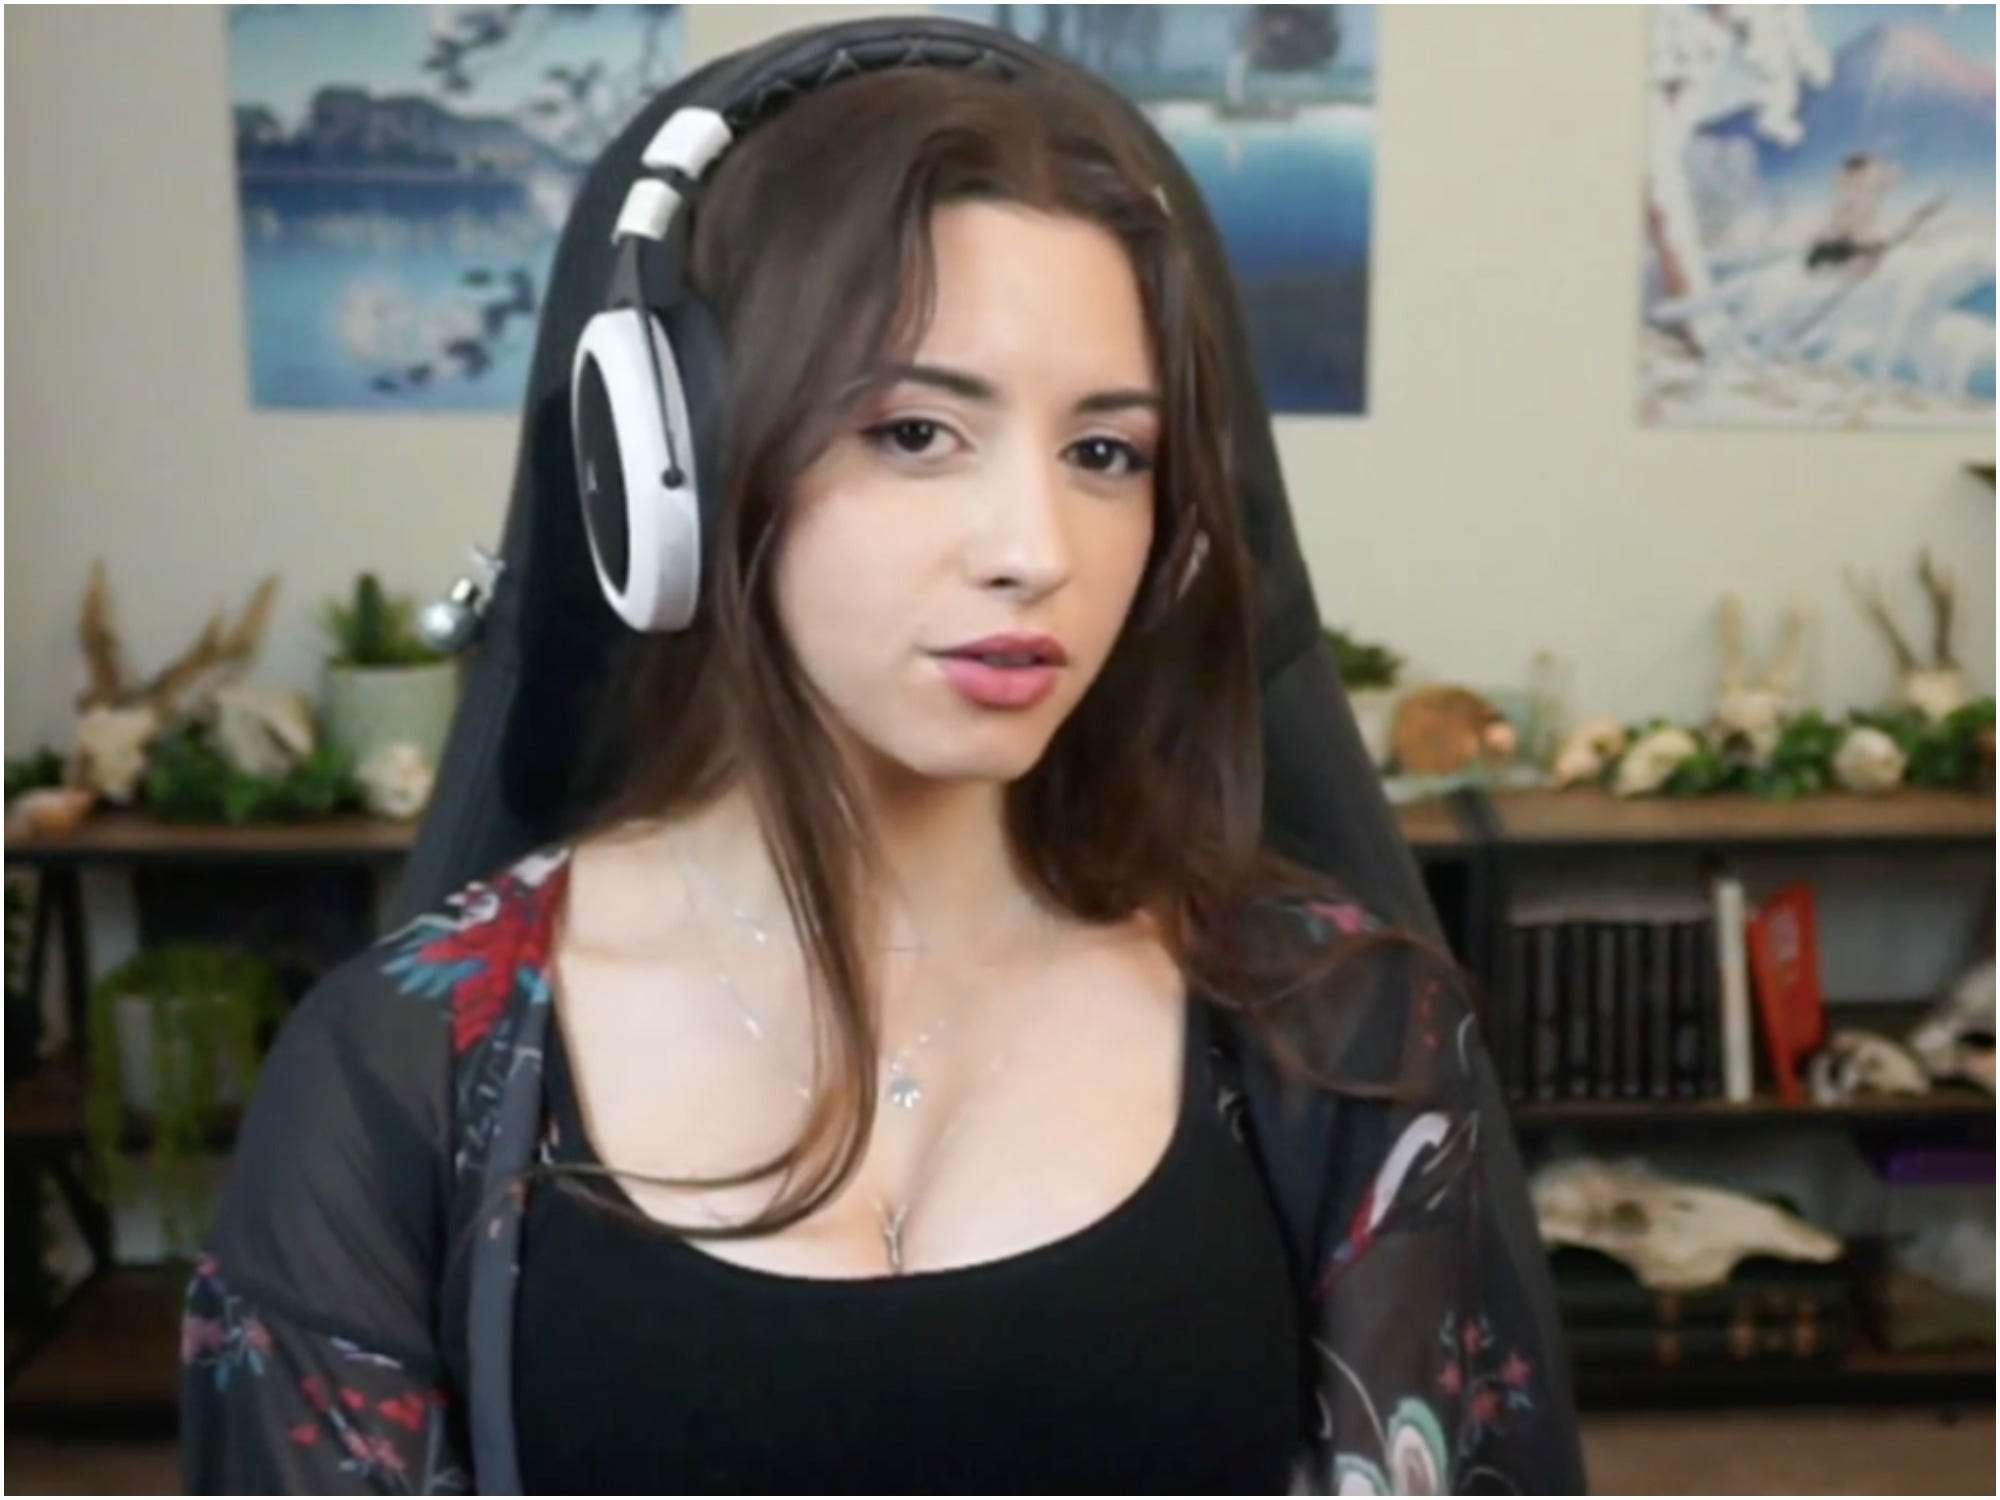 Streamer Sweet Anita Says She May Quit Twitch Because The Mental Toll Of Onlin Erofound